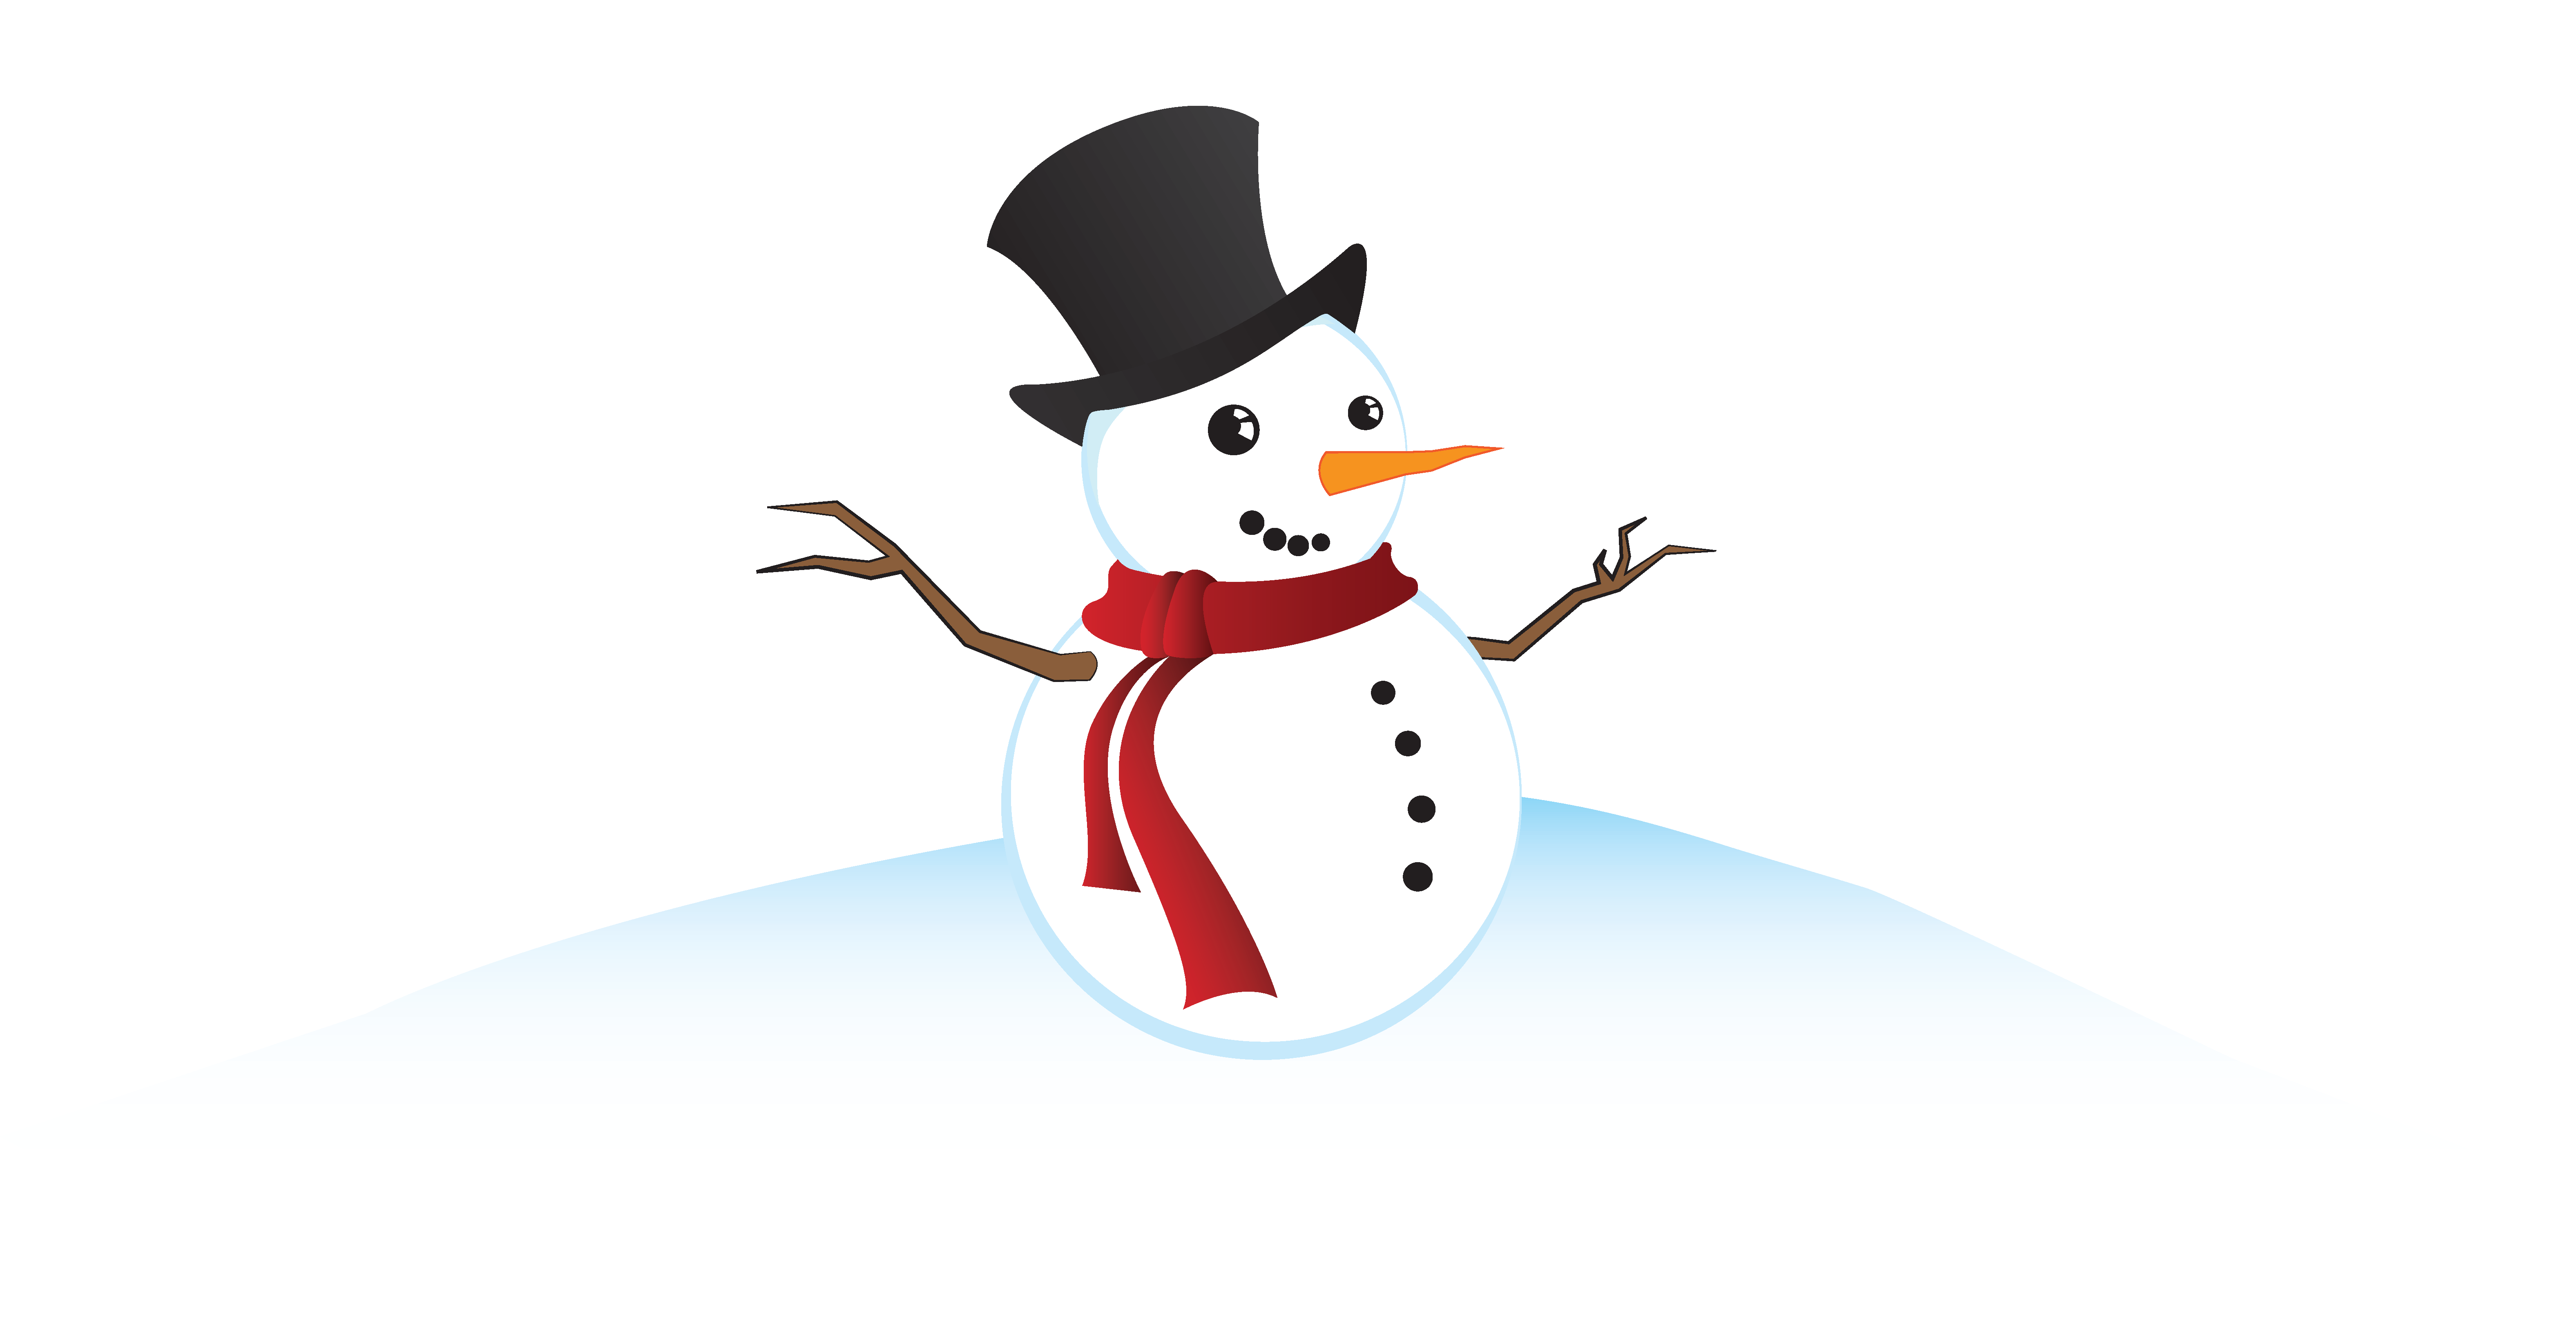 Coal clipart snowman. The great building competition